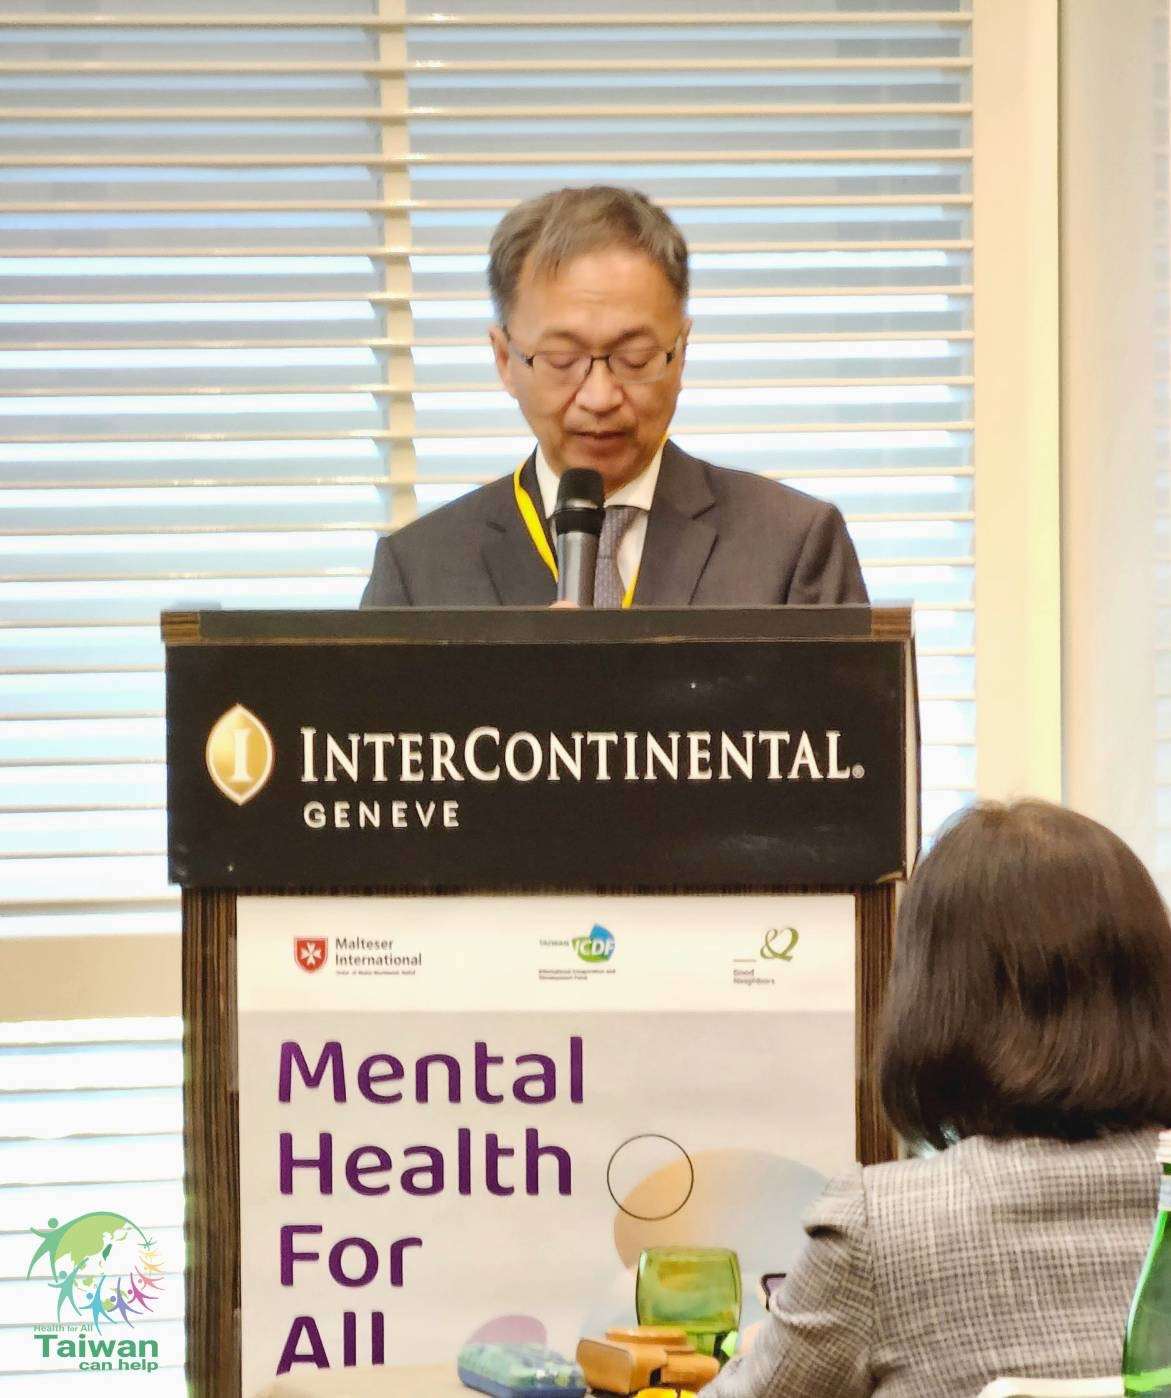 The TaiwanICDF collaborates with Malteser International and Good Neighbors to co-host a forum on mental health for all in Geneva during the 76th World Health Assembly